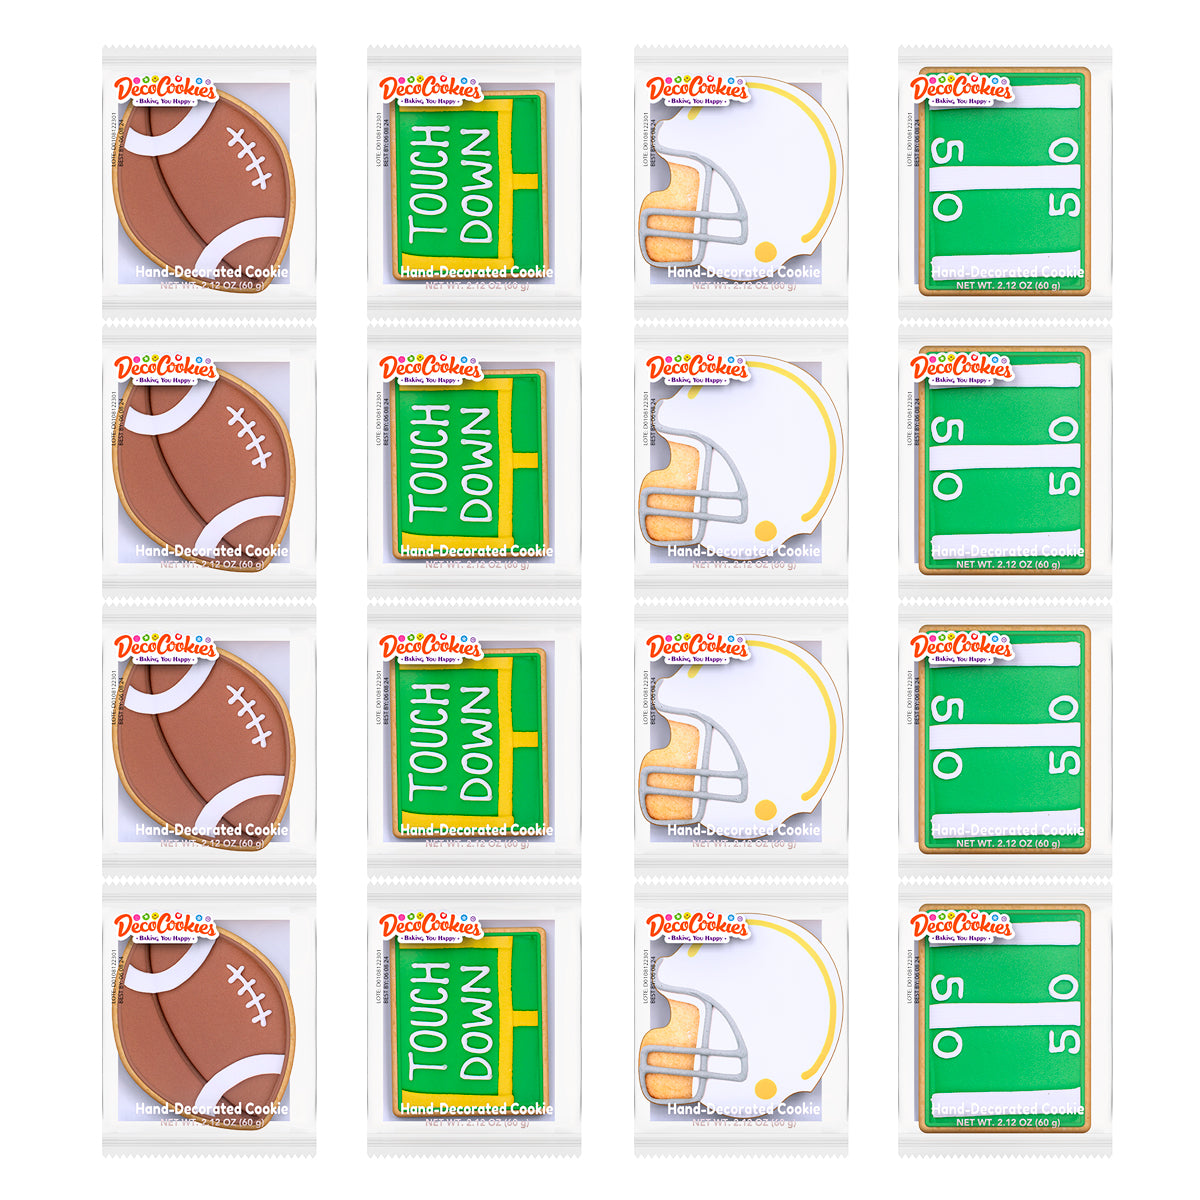 Football Hand-Decorated Cookies - 16 ct